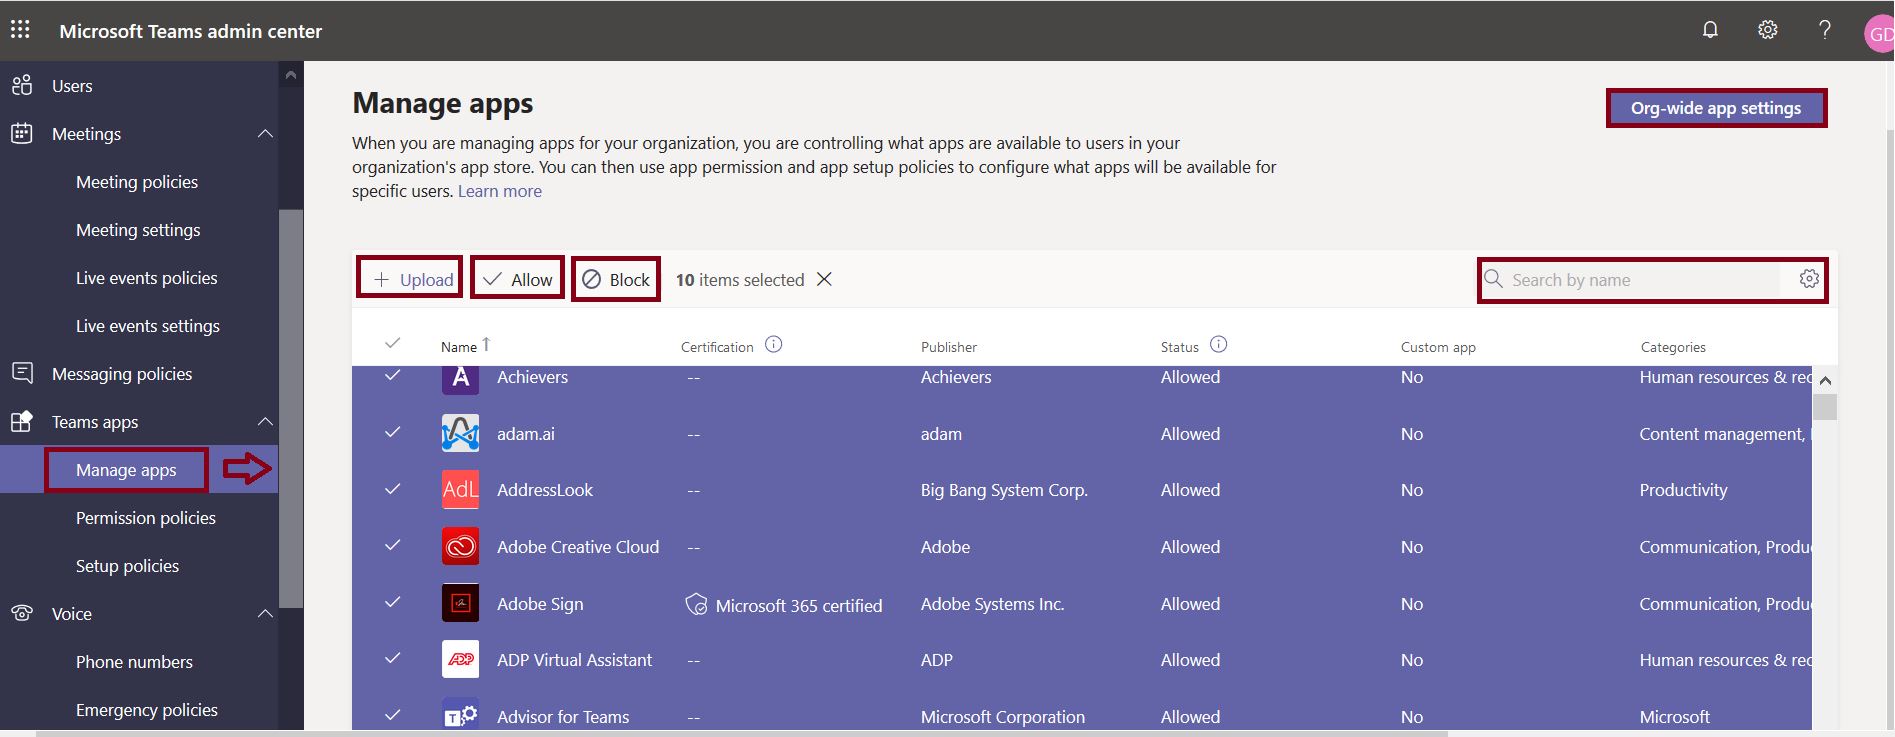 Manage apps in Teams from Microsoft Teams admin center